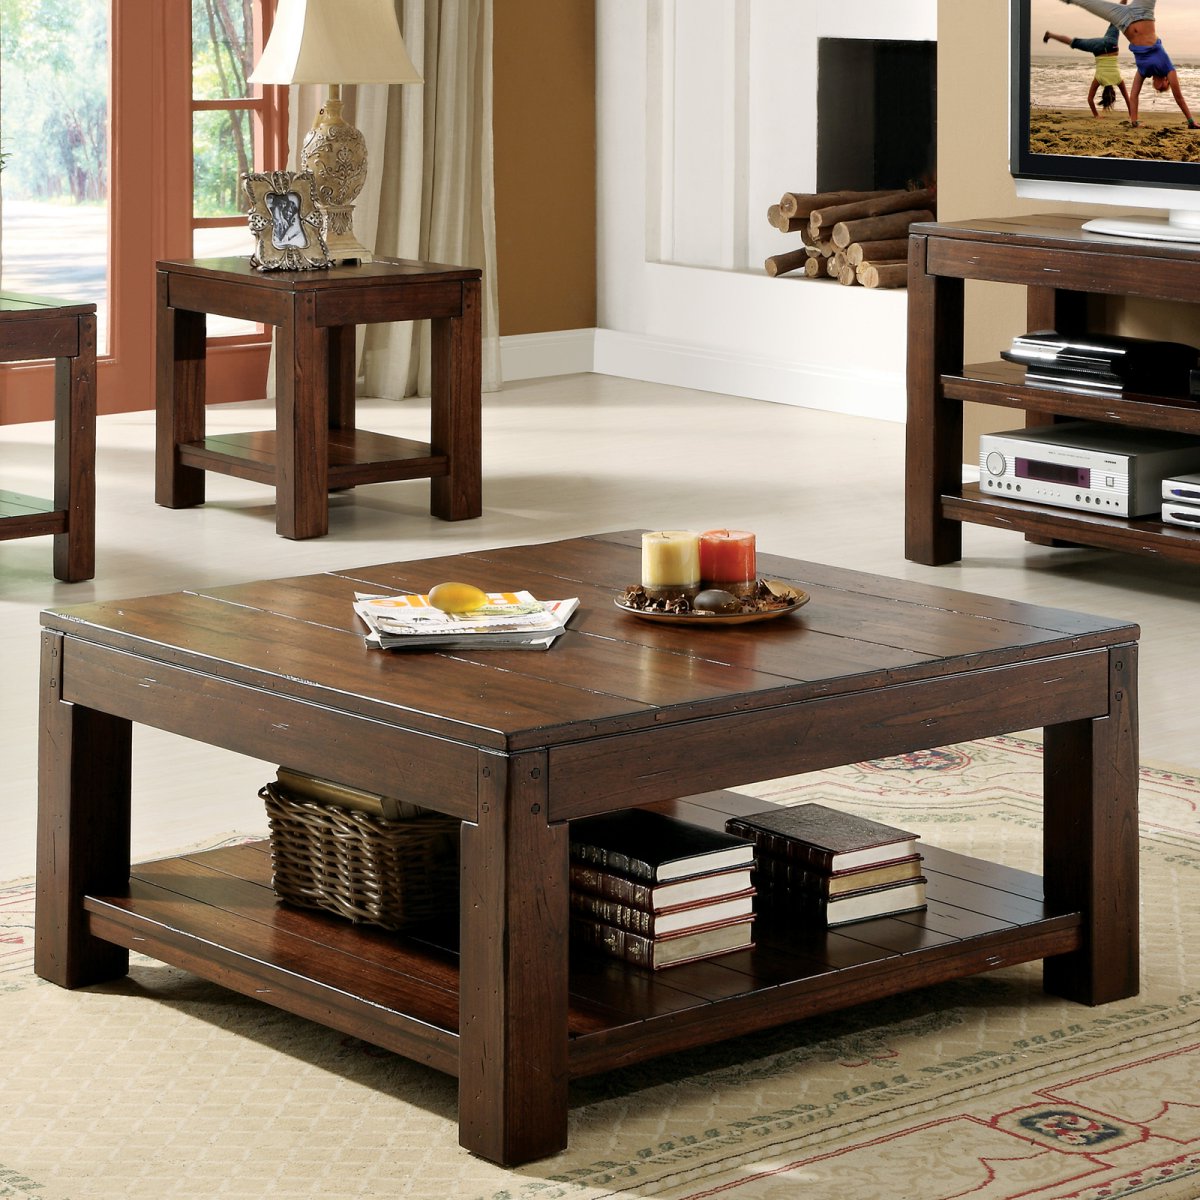 Large Square Dark Wood Coffee Table Sets